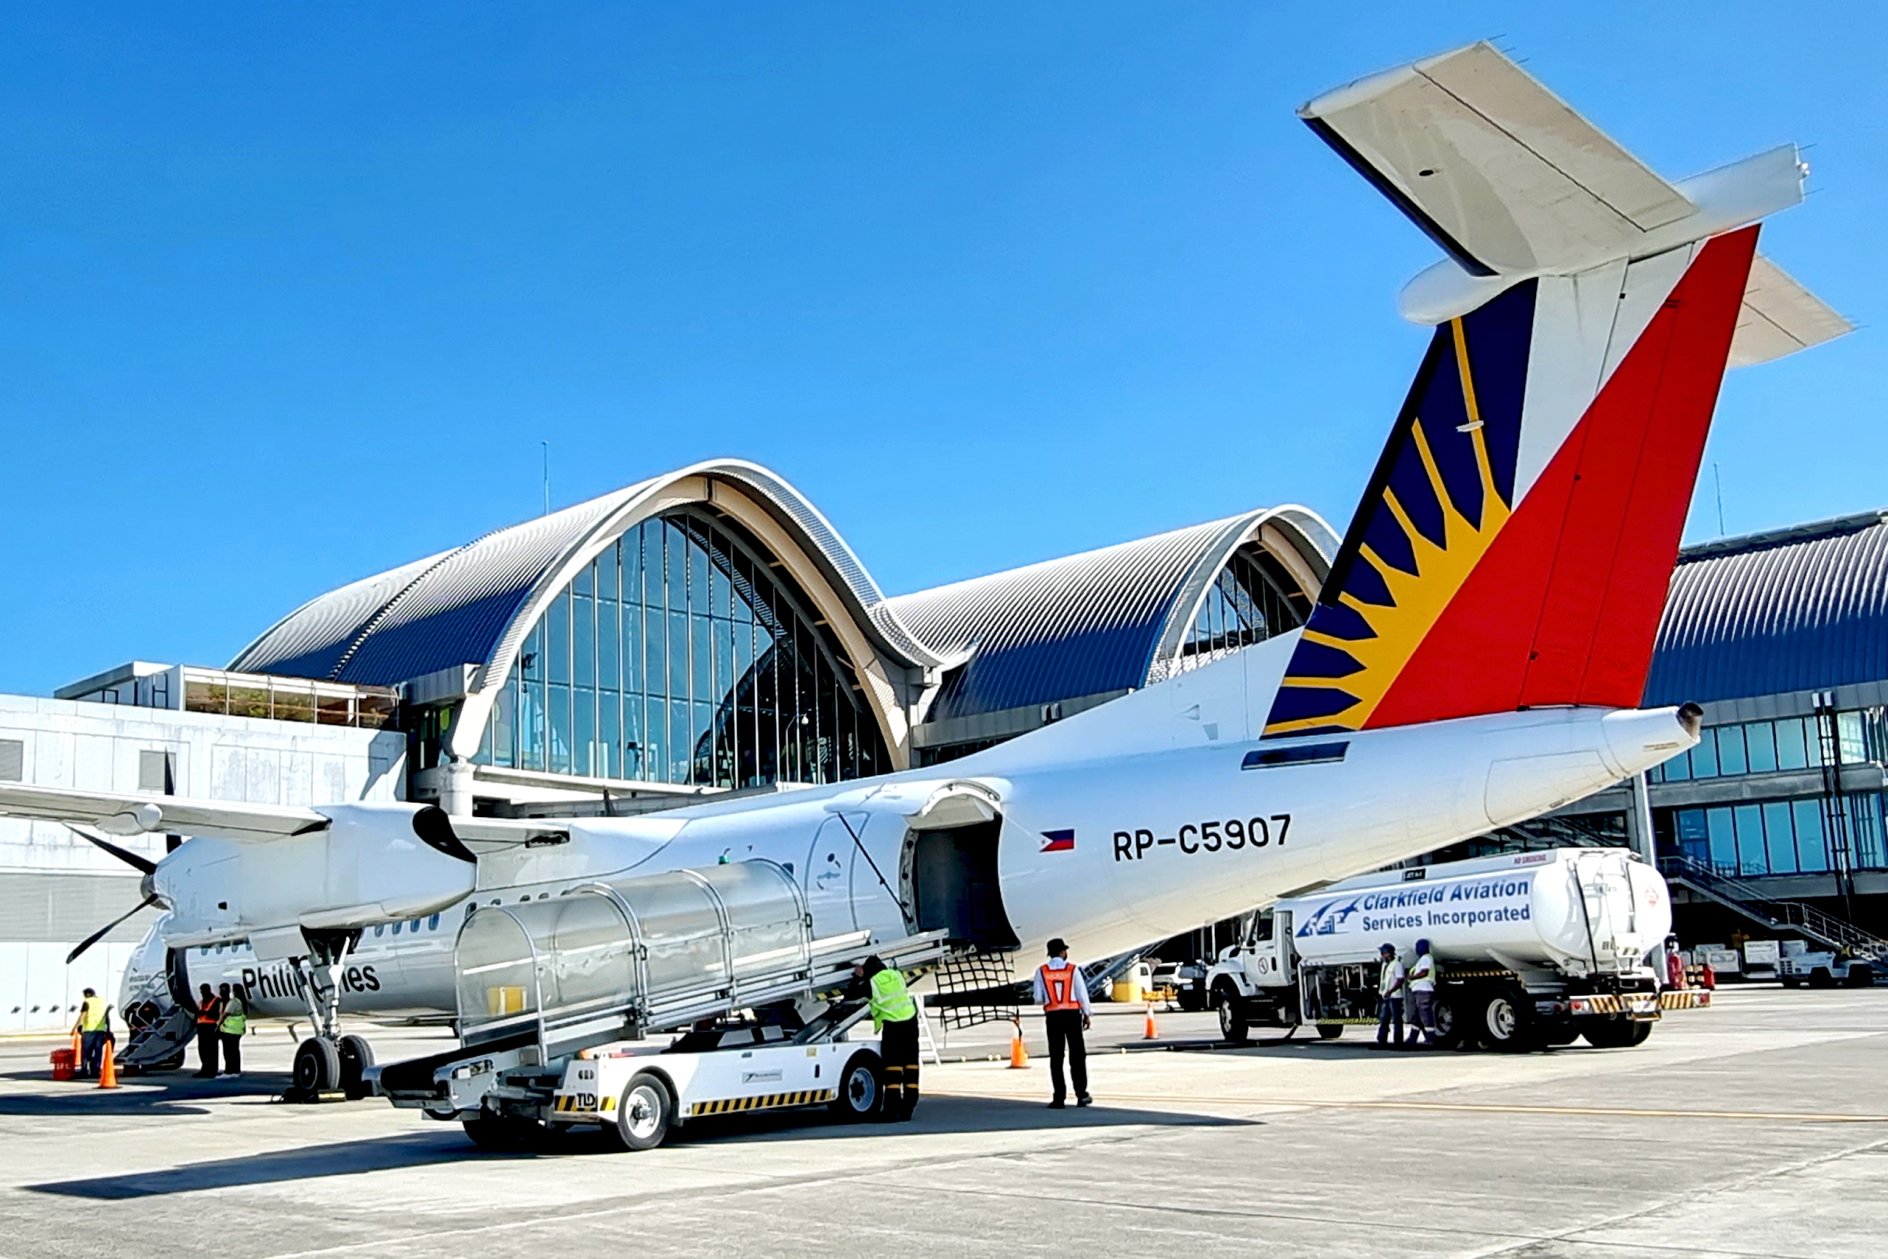 Philippine Airlines Dash 8 reg: RP-C5907. Click to enlarge.